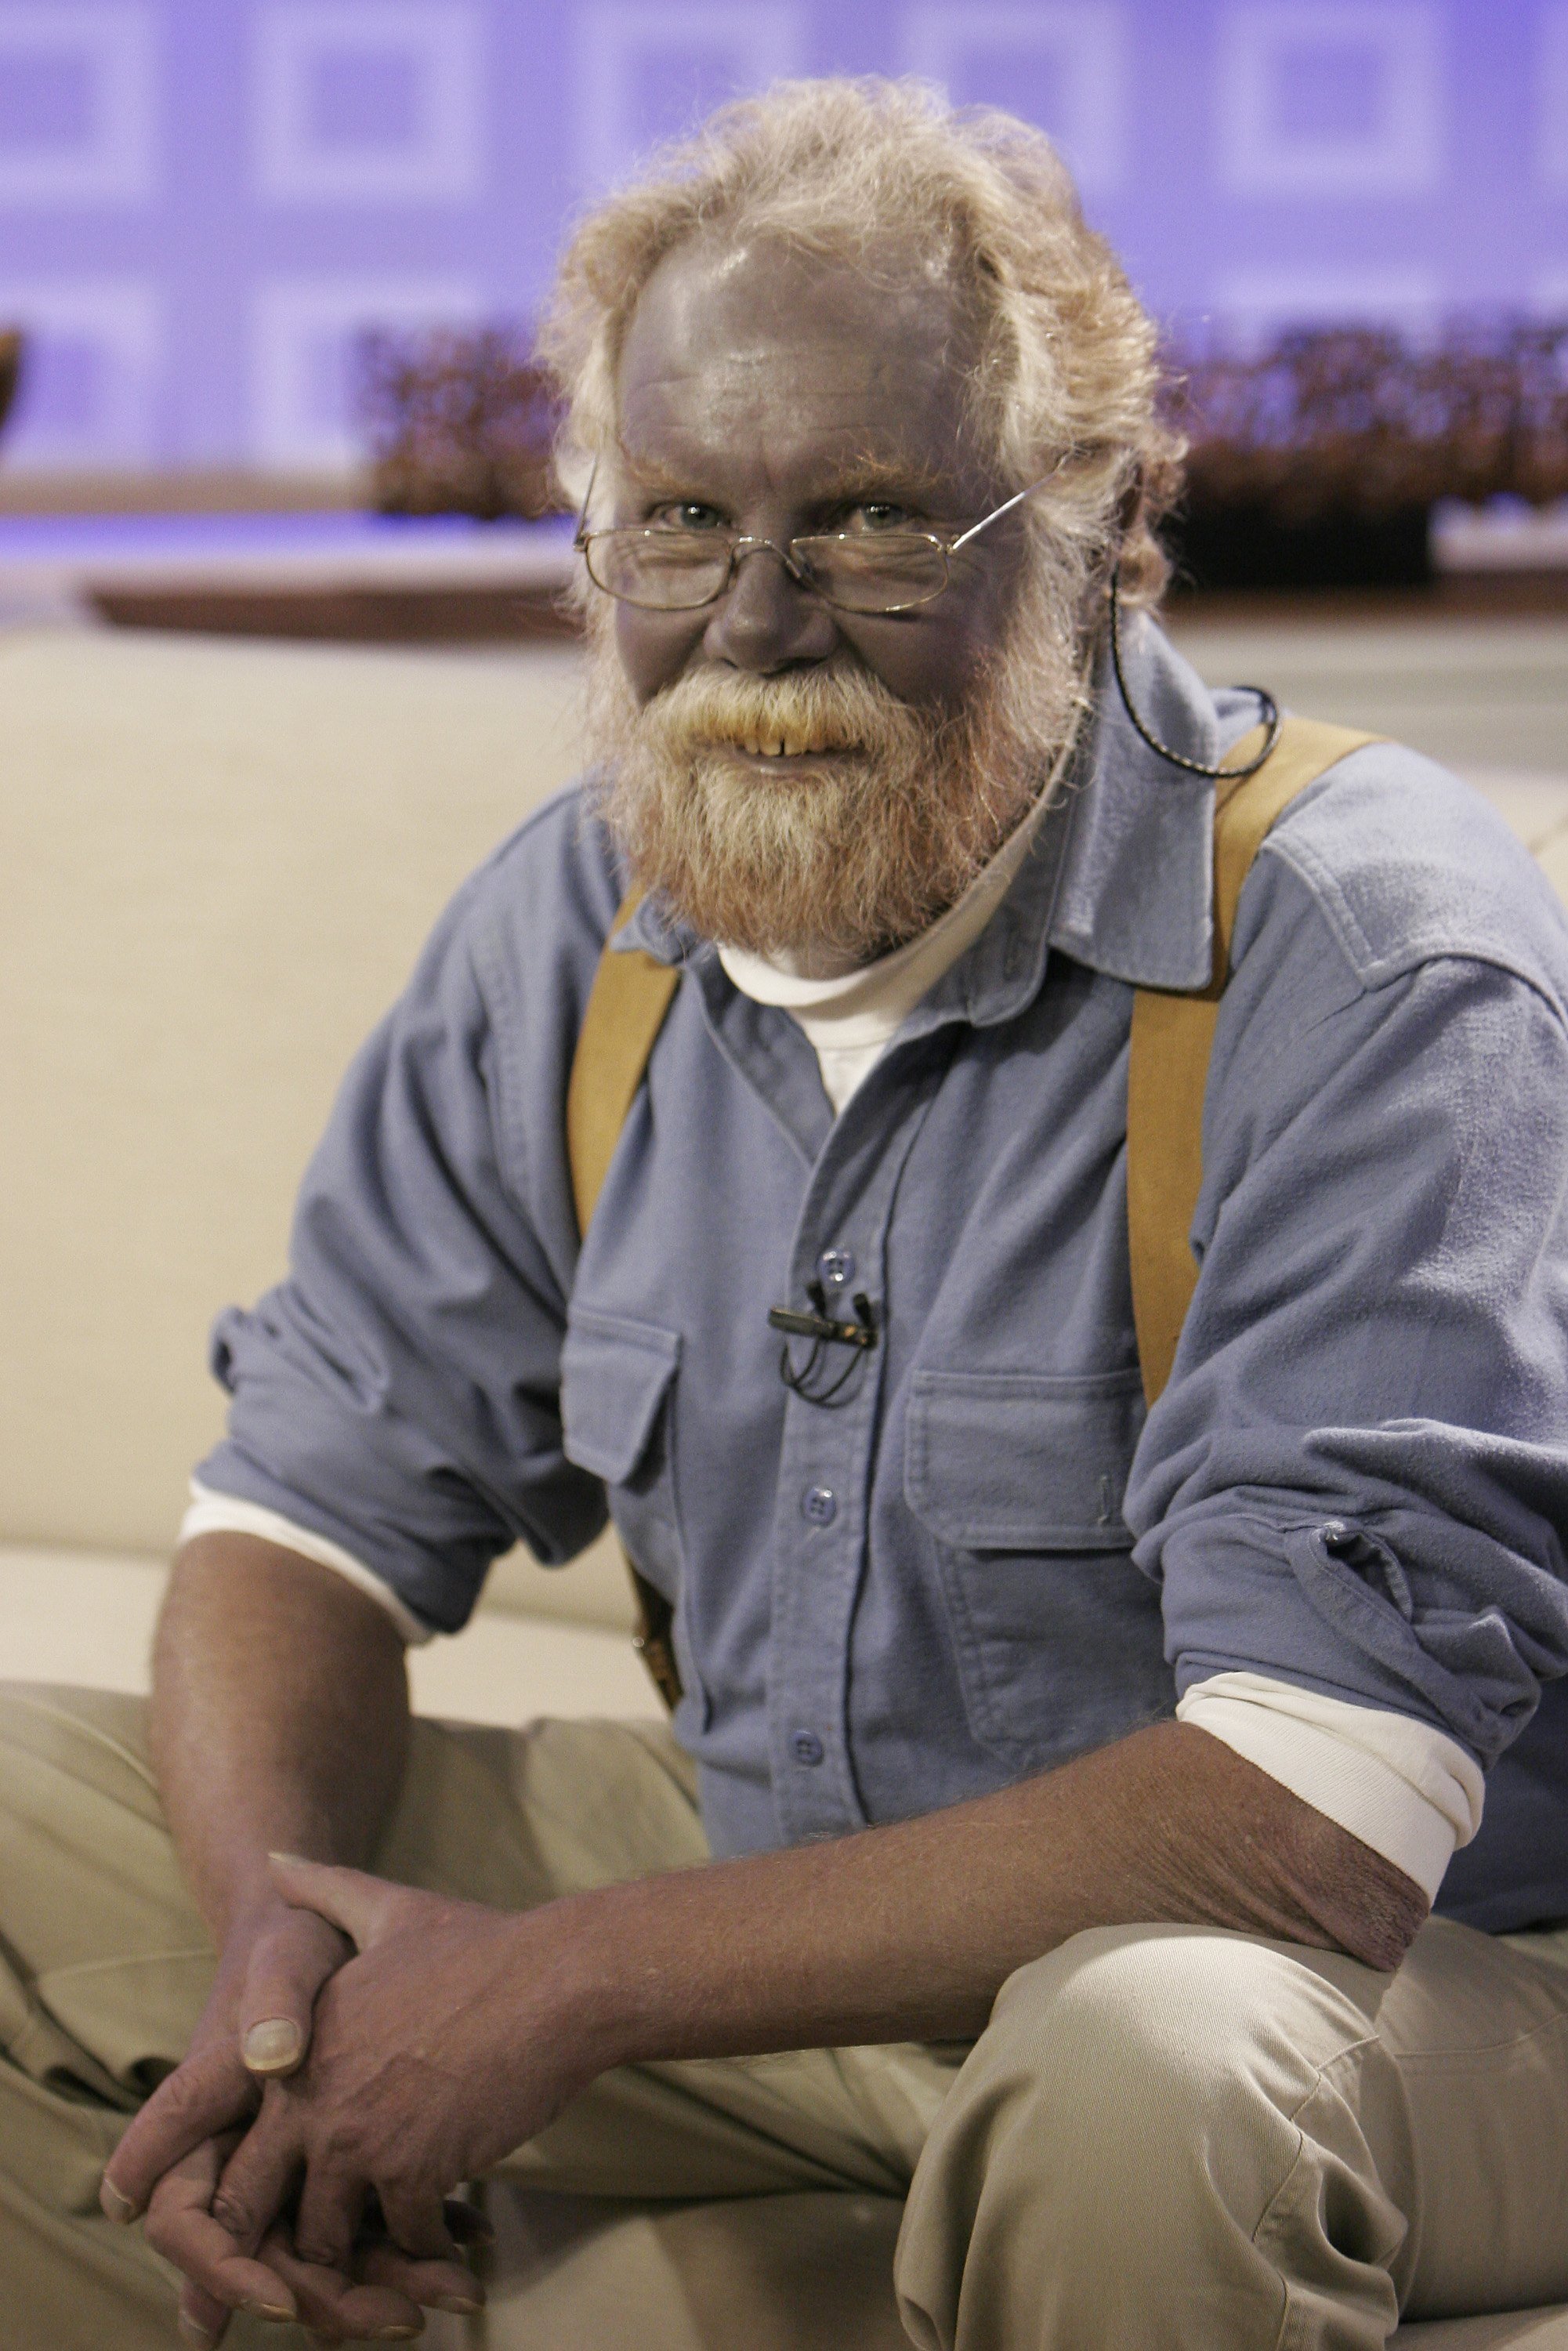 Paul Karason talks exclusively with NBC News' "Today" about turning permanently blue after using colloidal silver on January 7, 2008. | Source: Getty Images